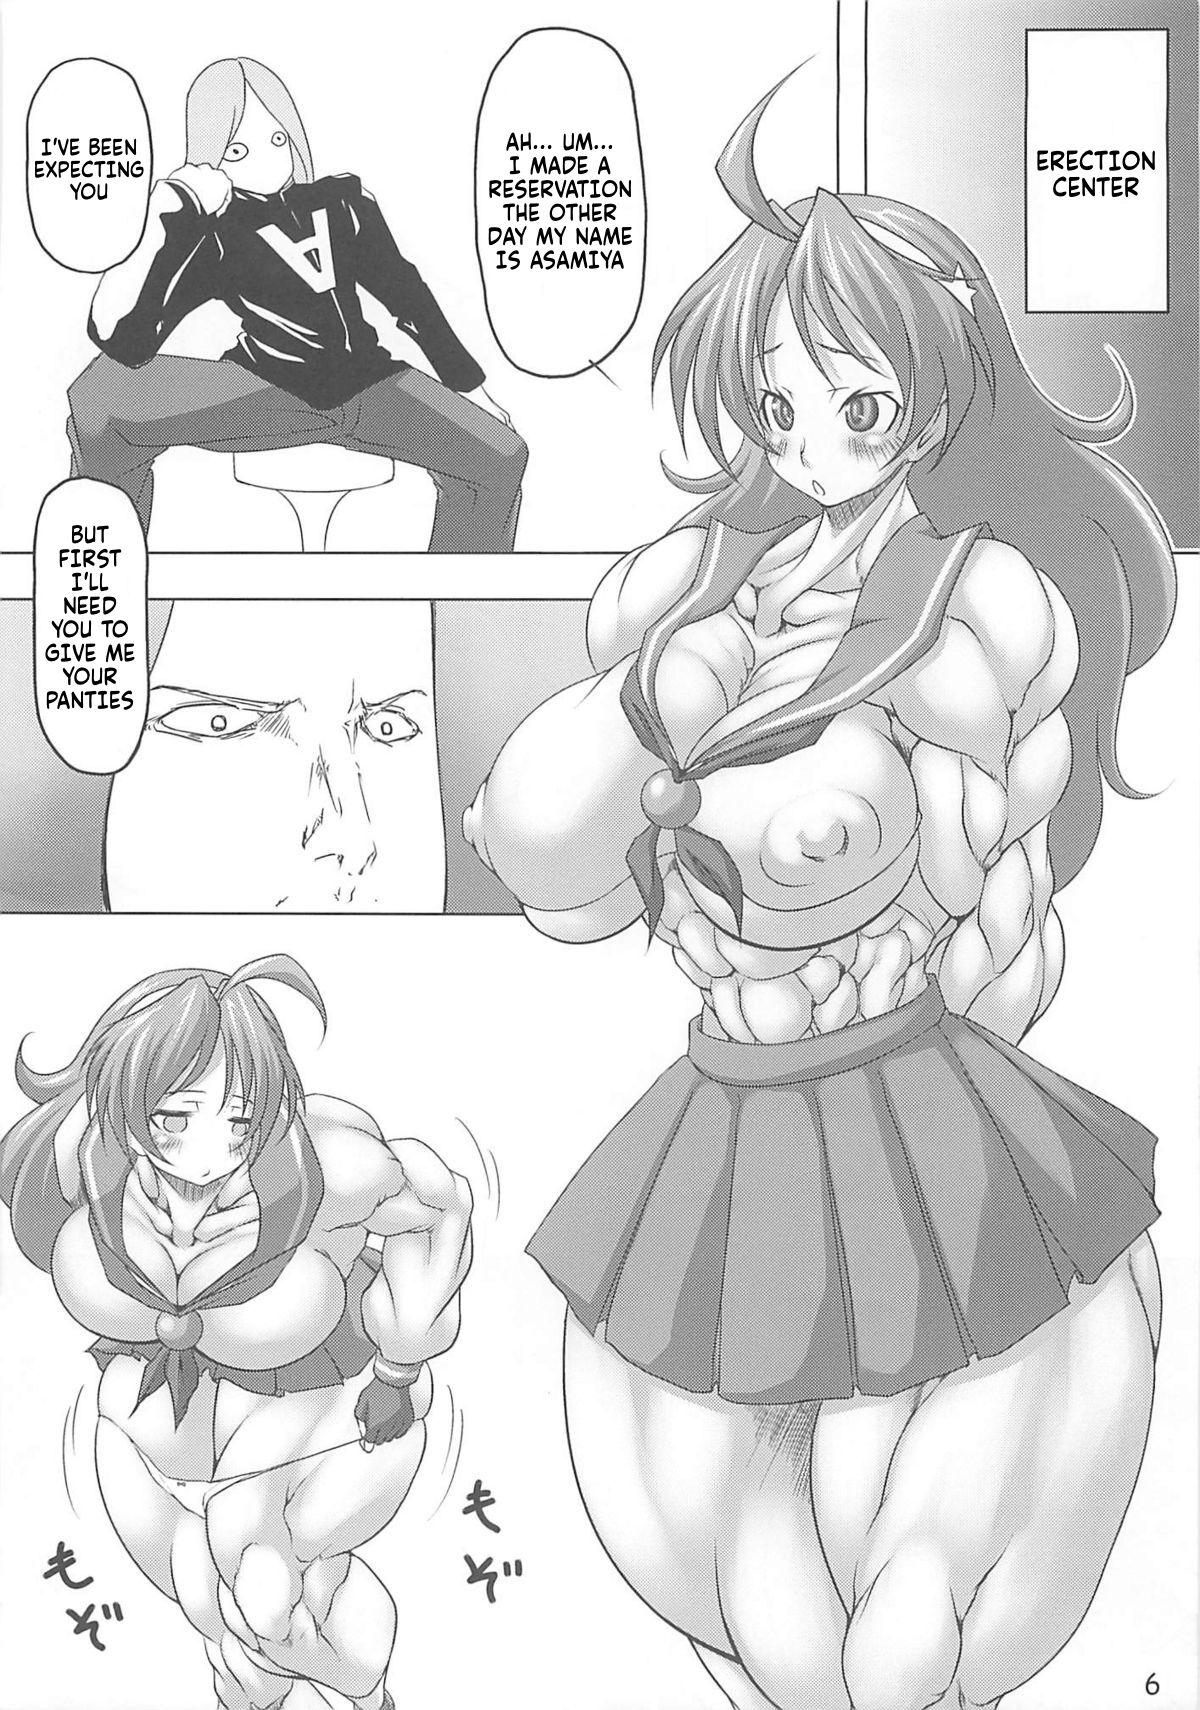 Cunt GIGANTIC DIVA - King of fighters Sapphicerotica - Page 5